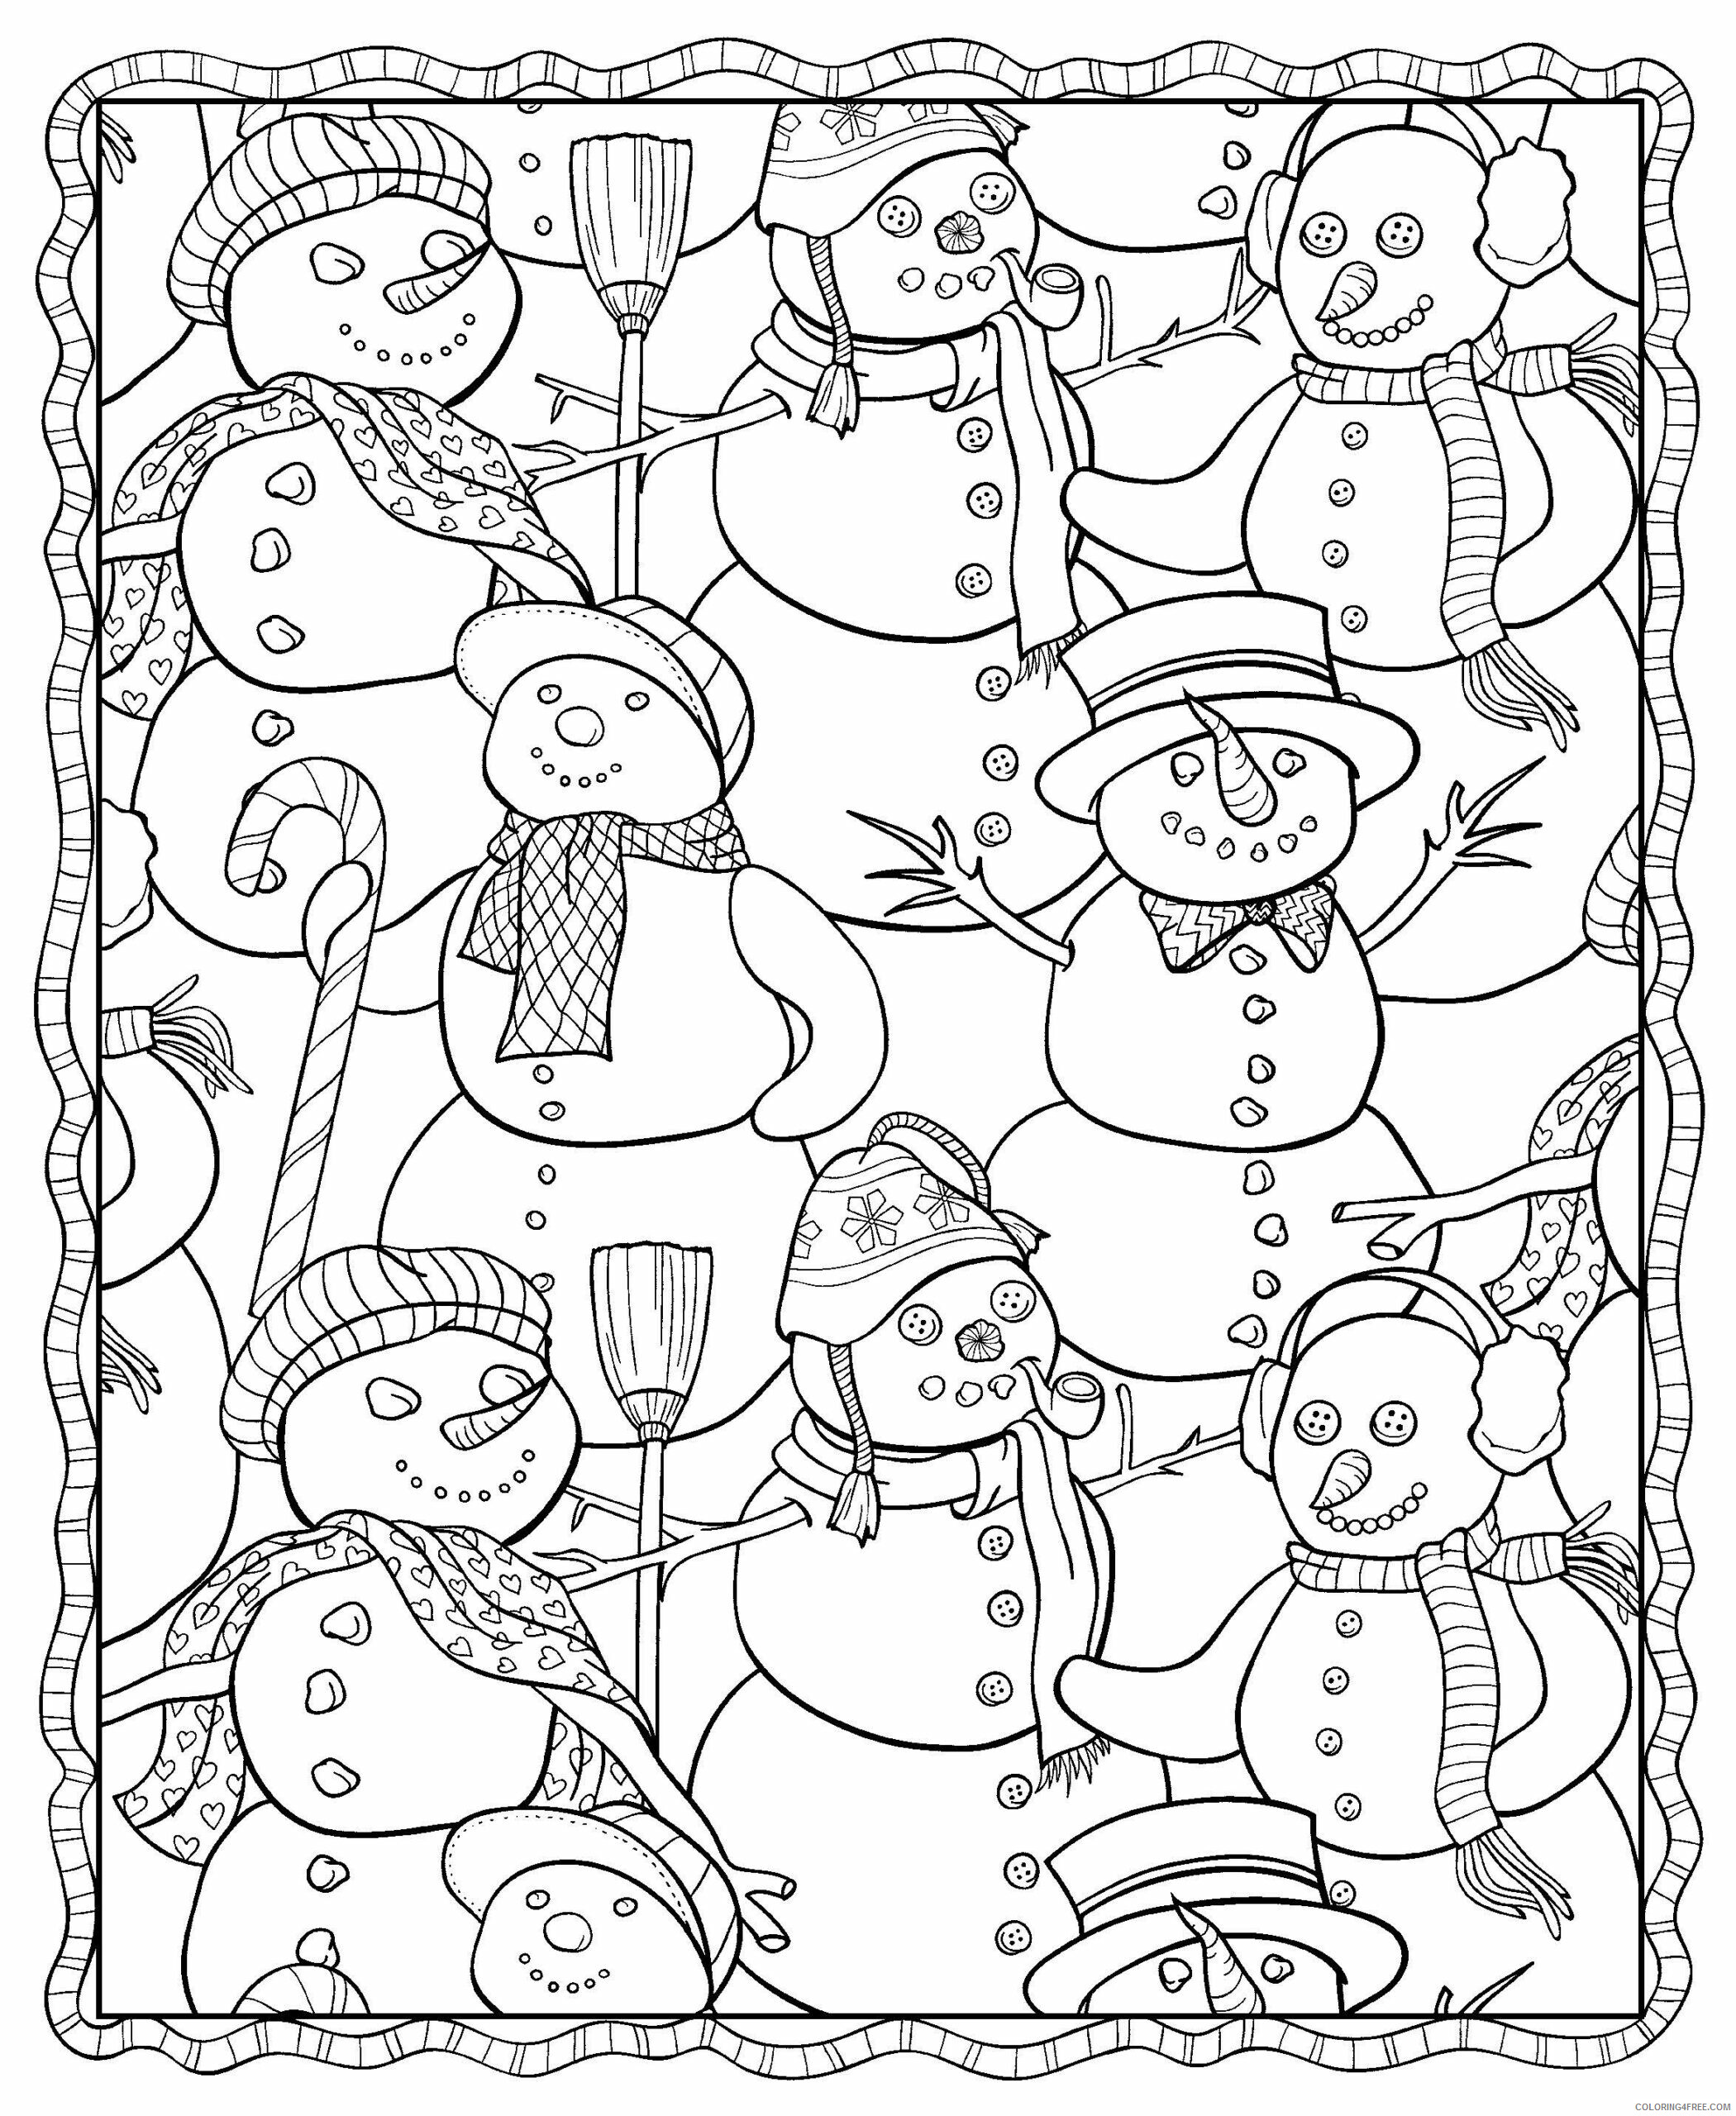 Snowman Coloring Pages Snowman Winter for Adults Printable 2021 5618 Coloring4free